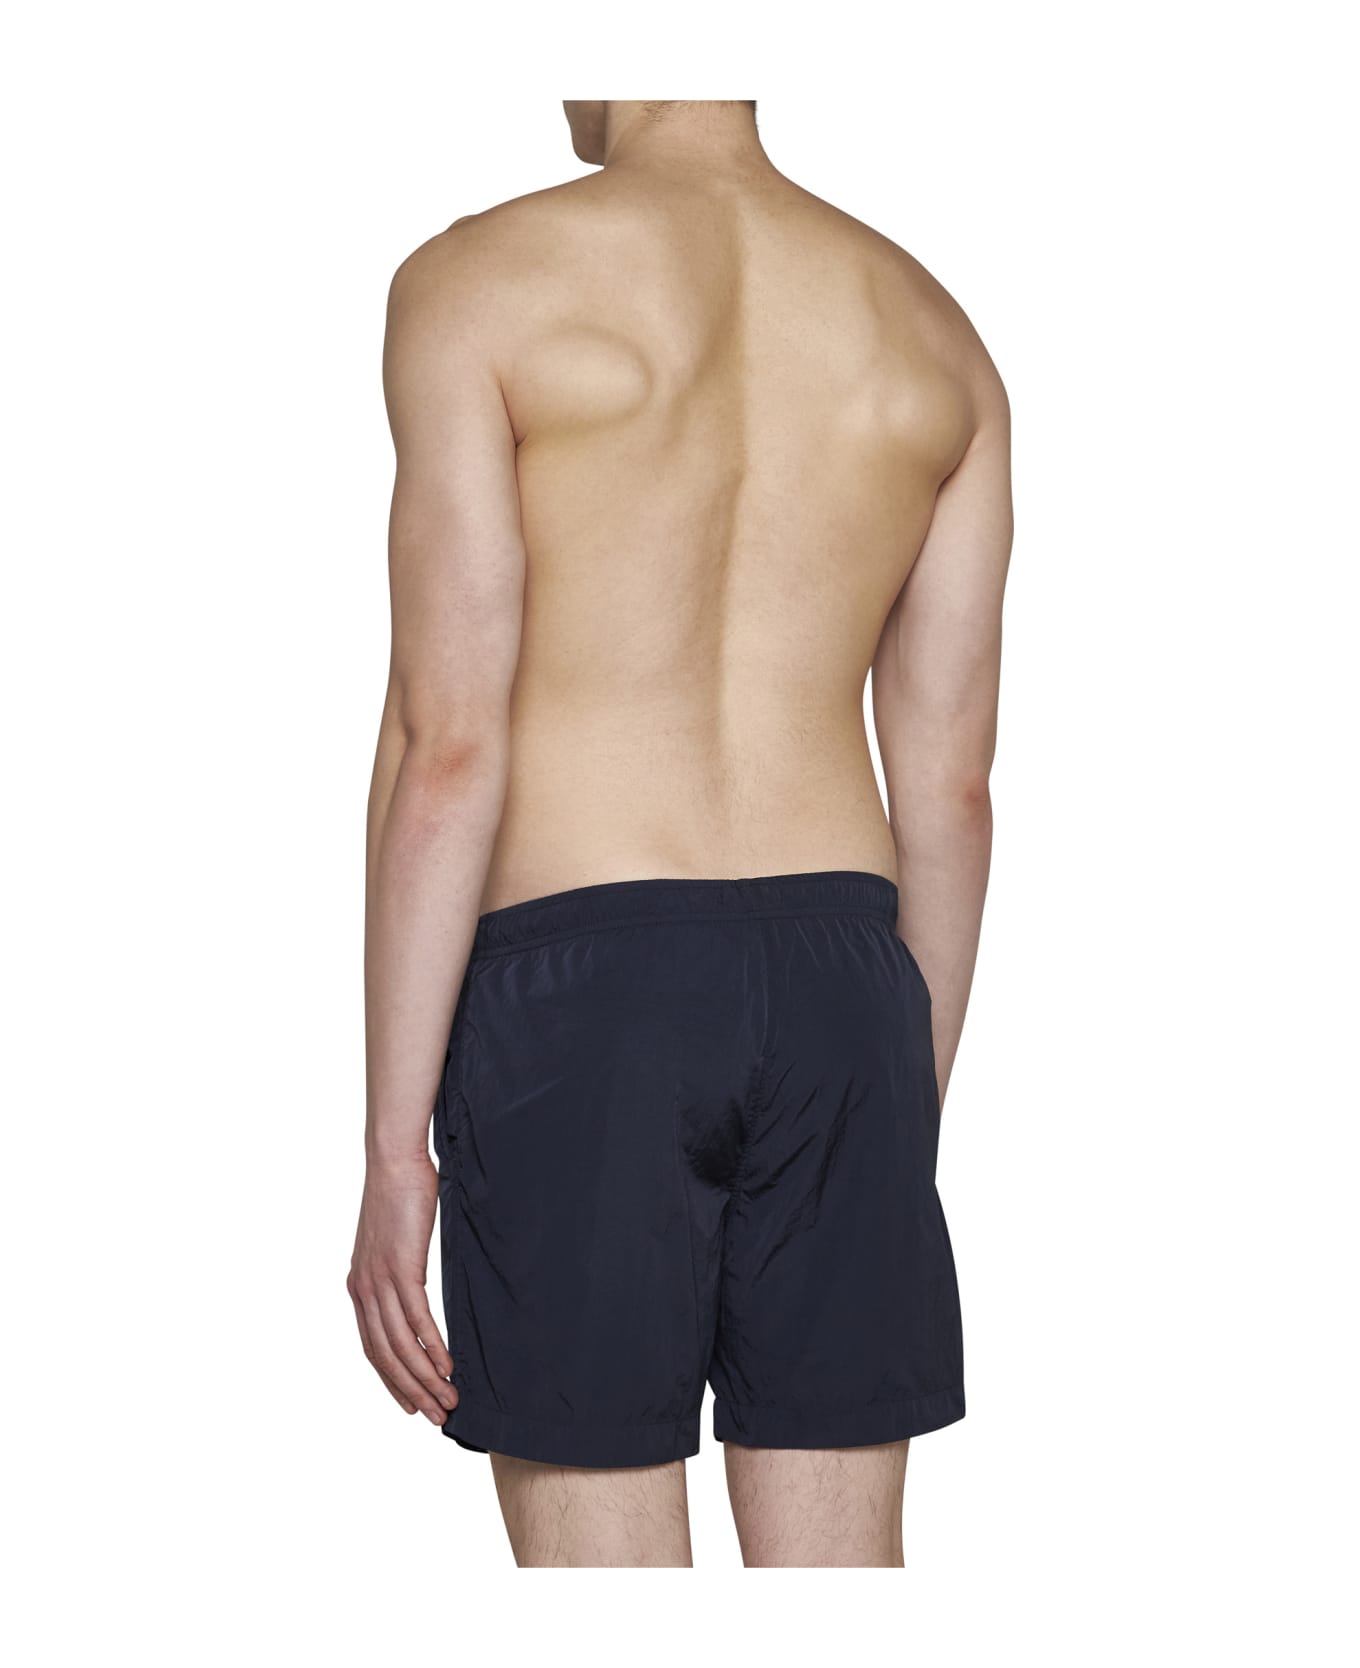 C.P. Company Swimming Trunks - Total eclipse